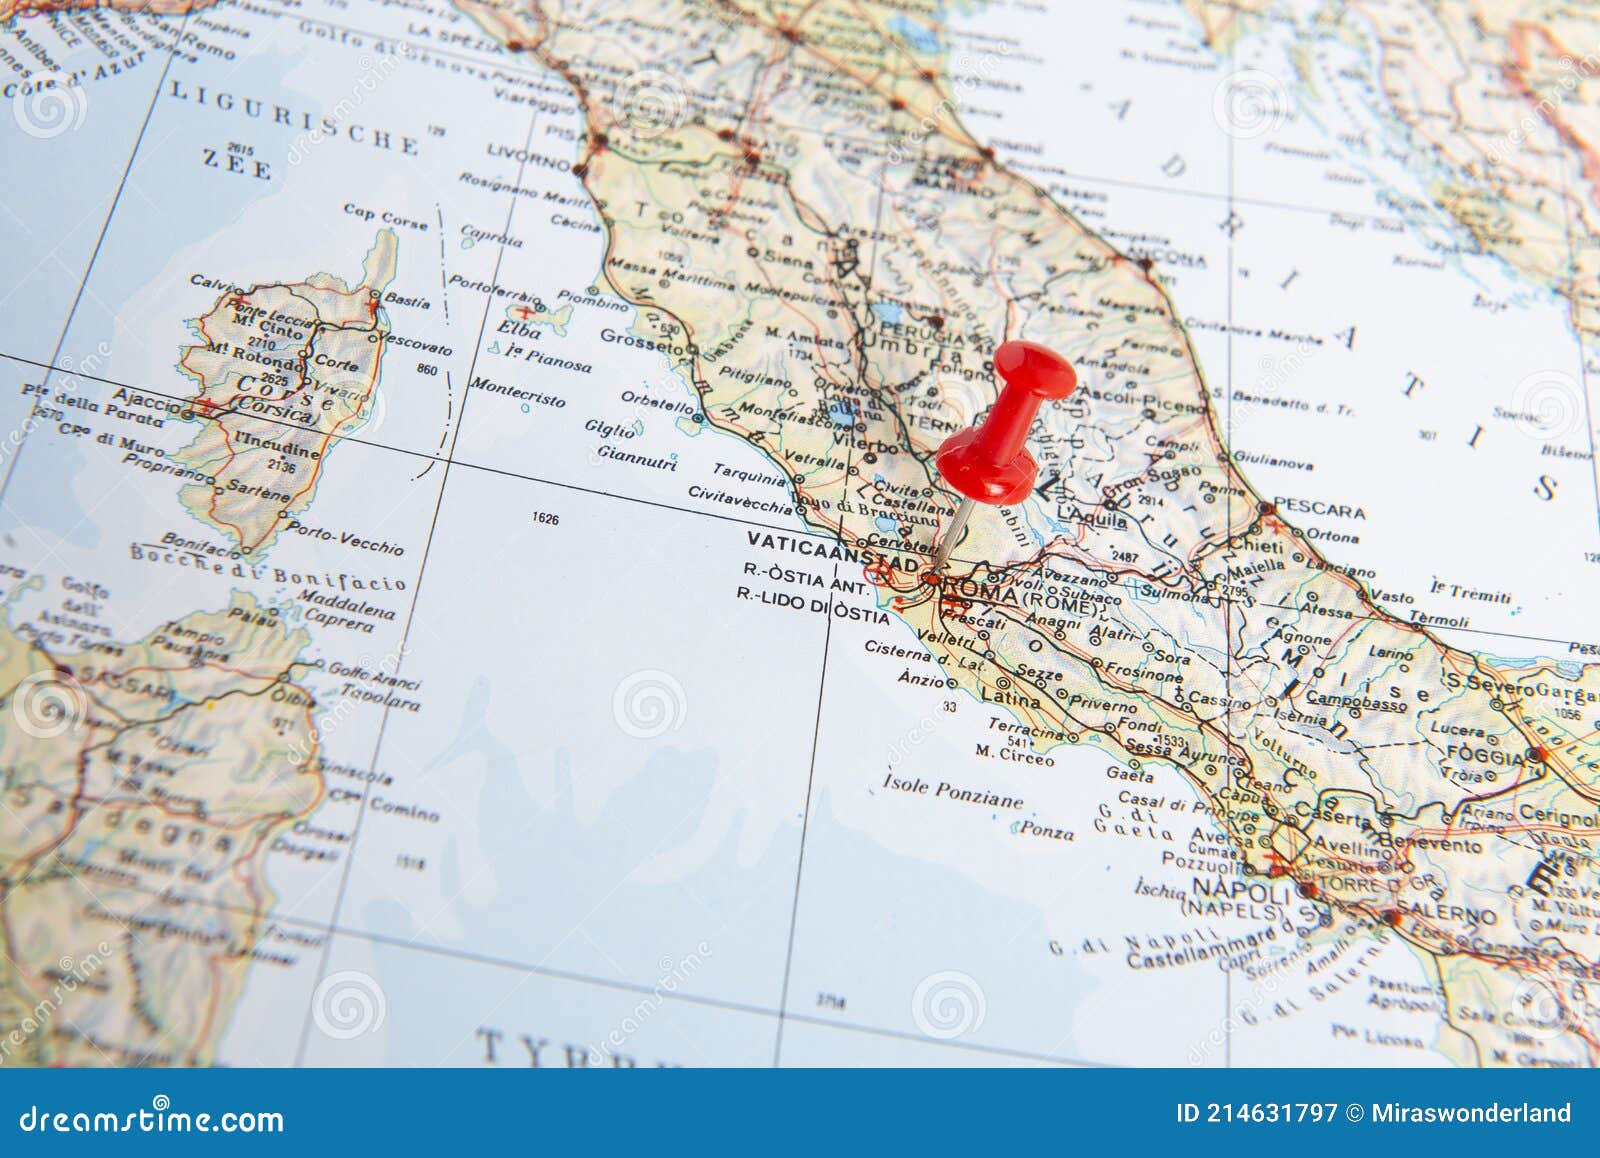 red pin in a map of the italy pointing out vatican city as a concept for a desitnation one wishes to go to or has visted already